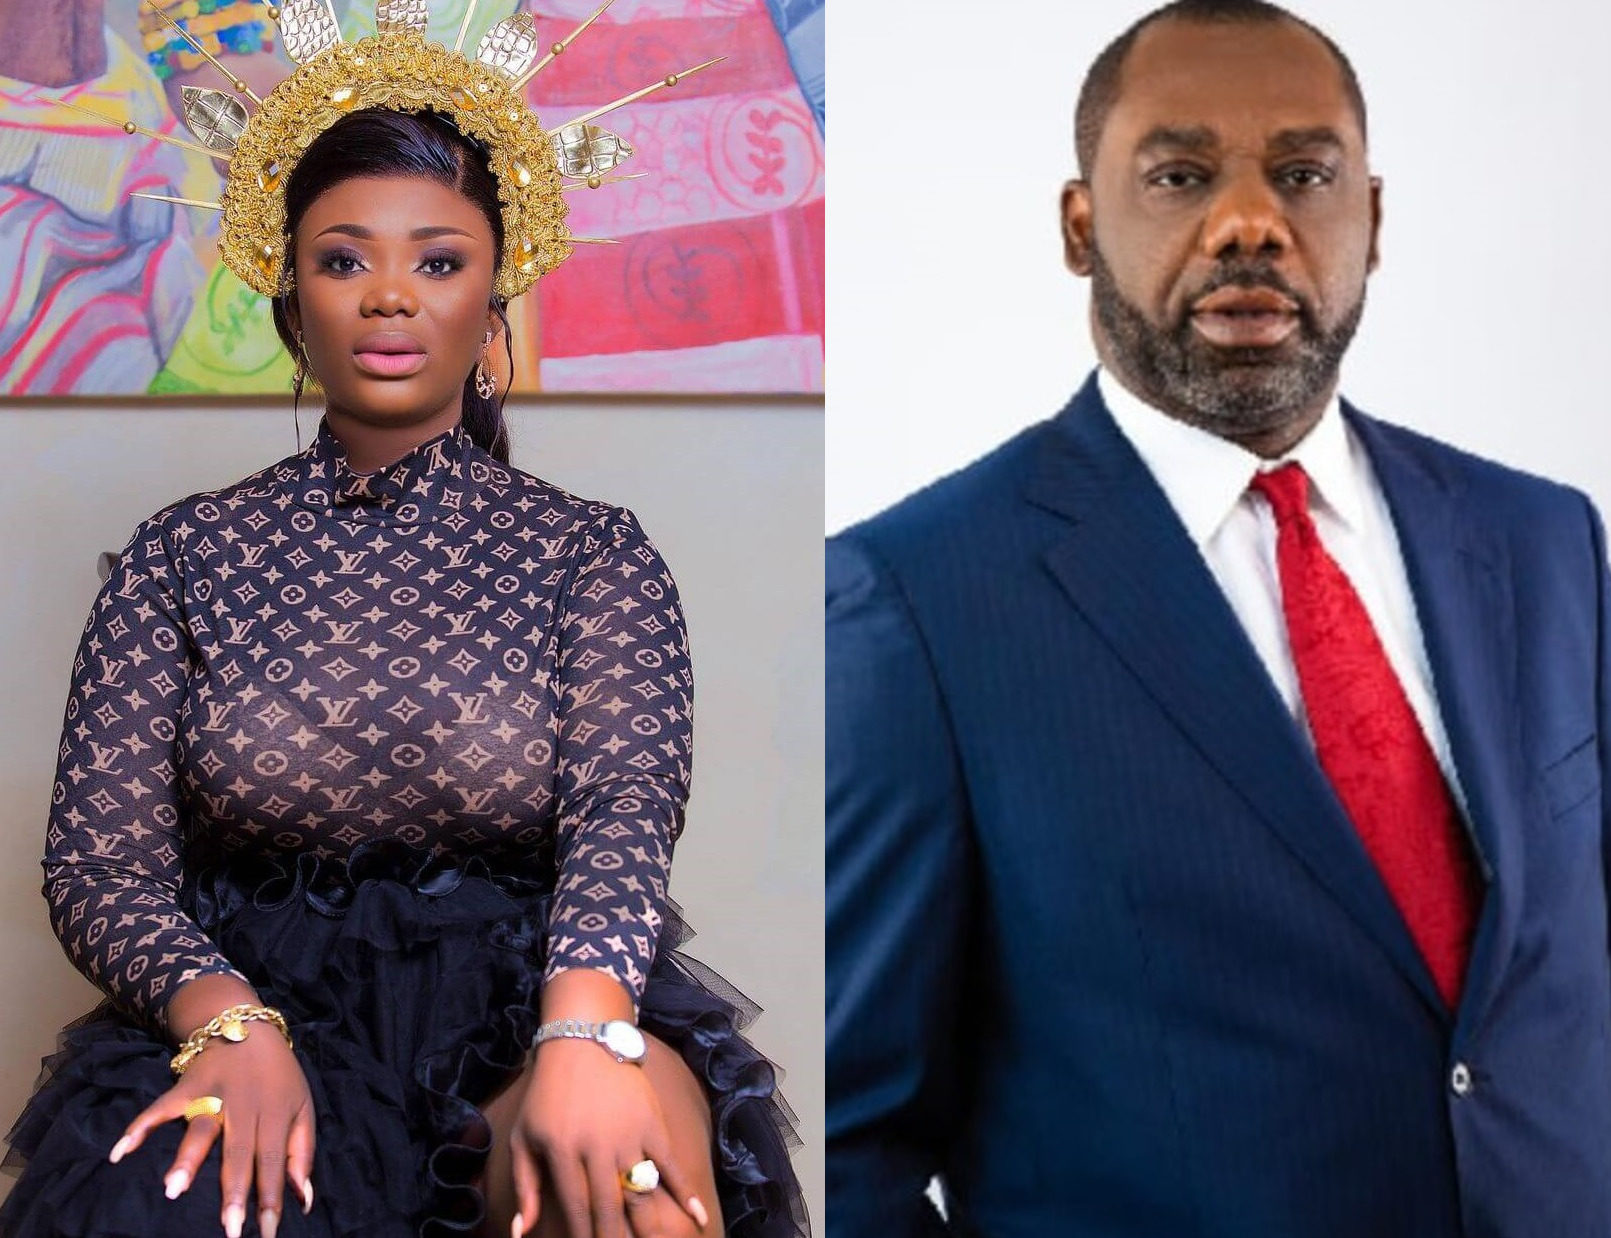  Akua GMB Speaks After It Was Alleged She Has A Romantic Relationship With Ghana’s Energy Minister, Matthew Opoku Prempeh